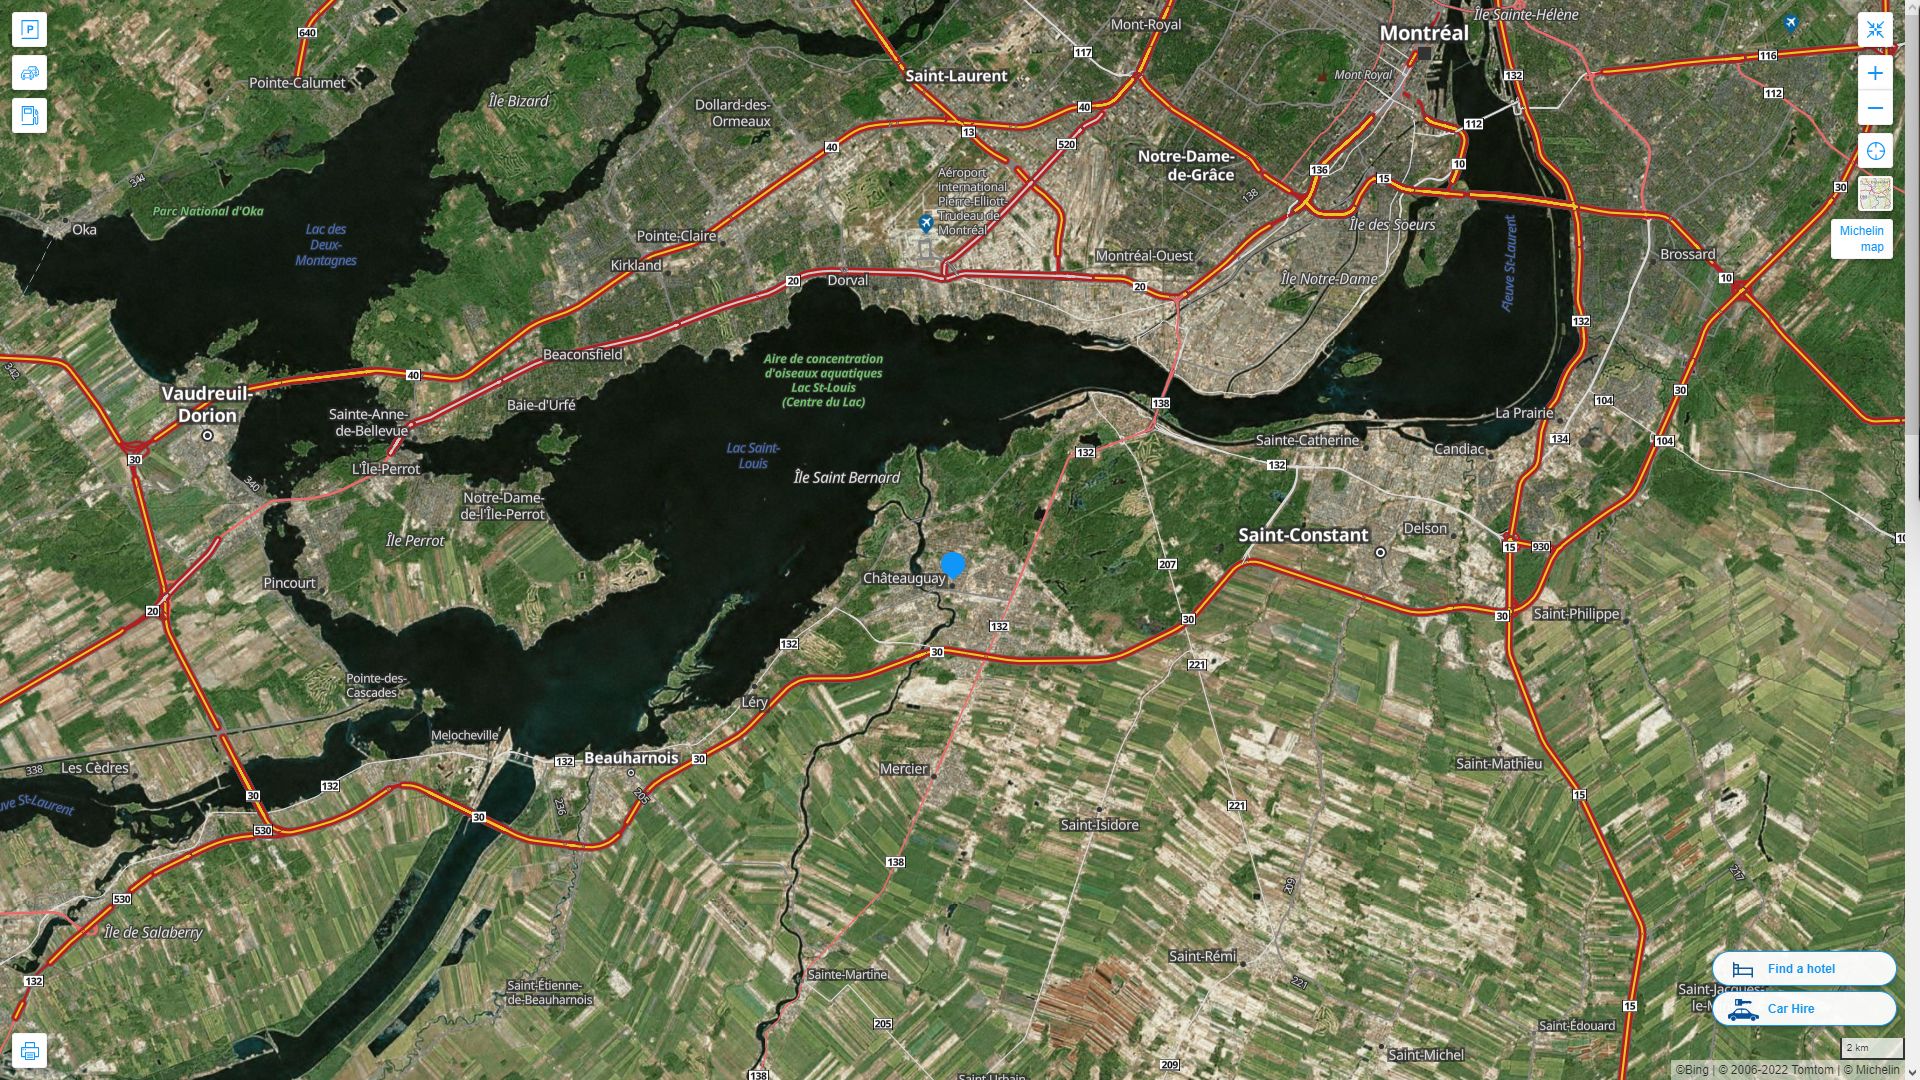 Chateauguay Highway and Road Map with Satellite View